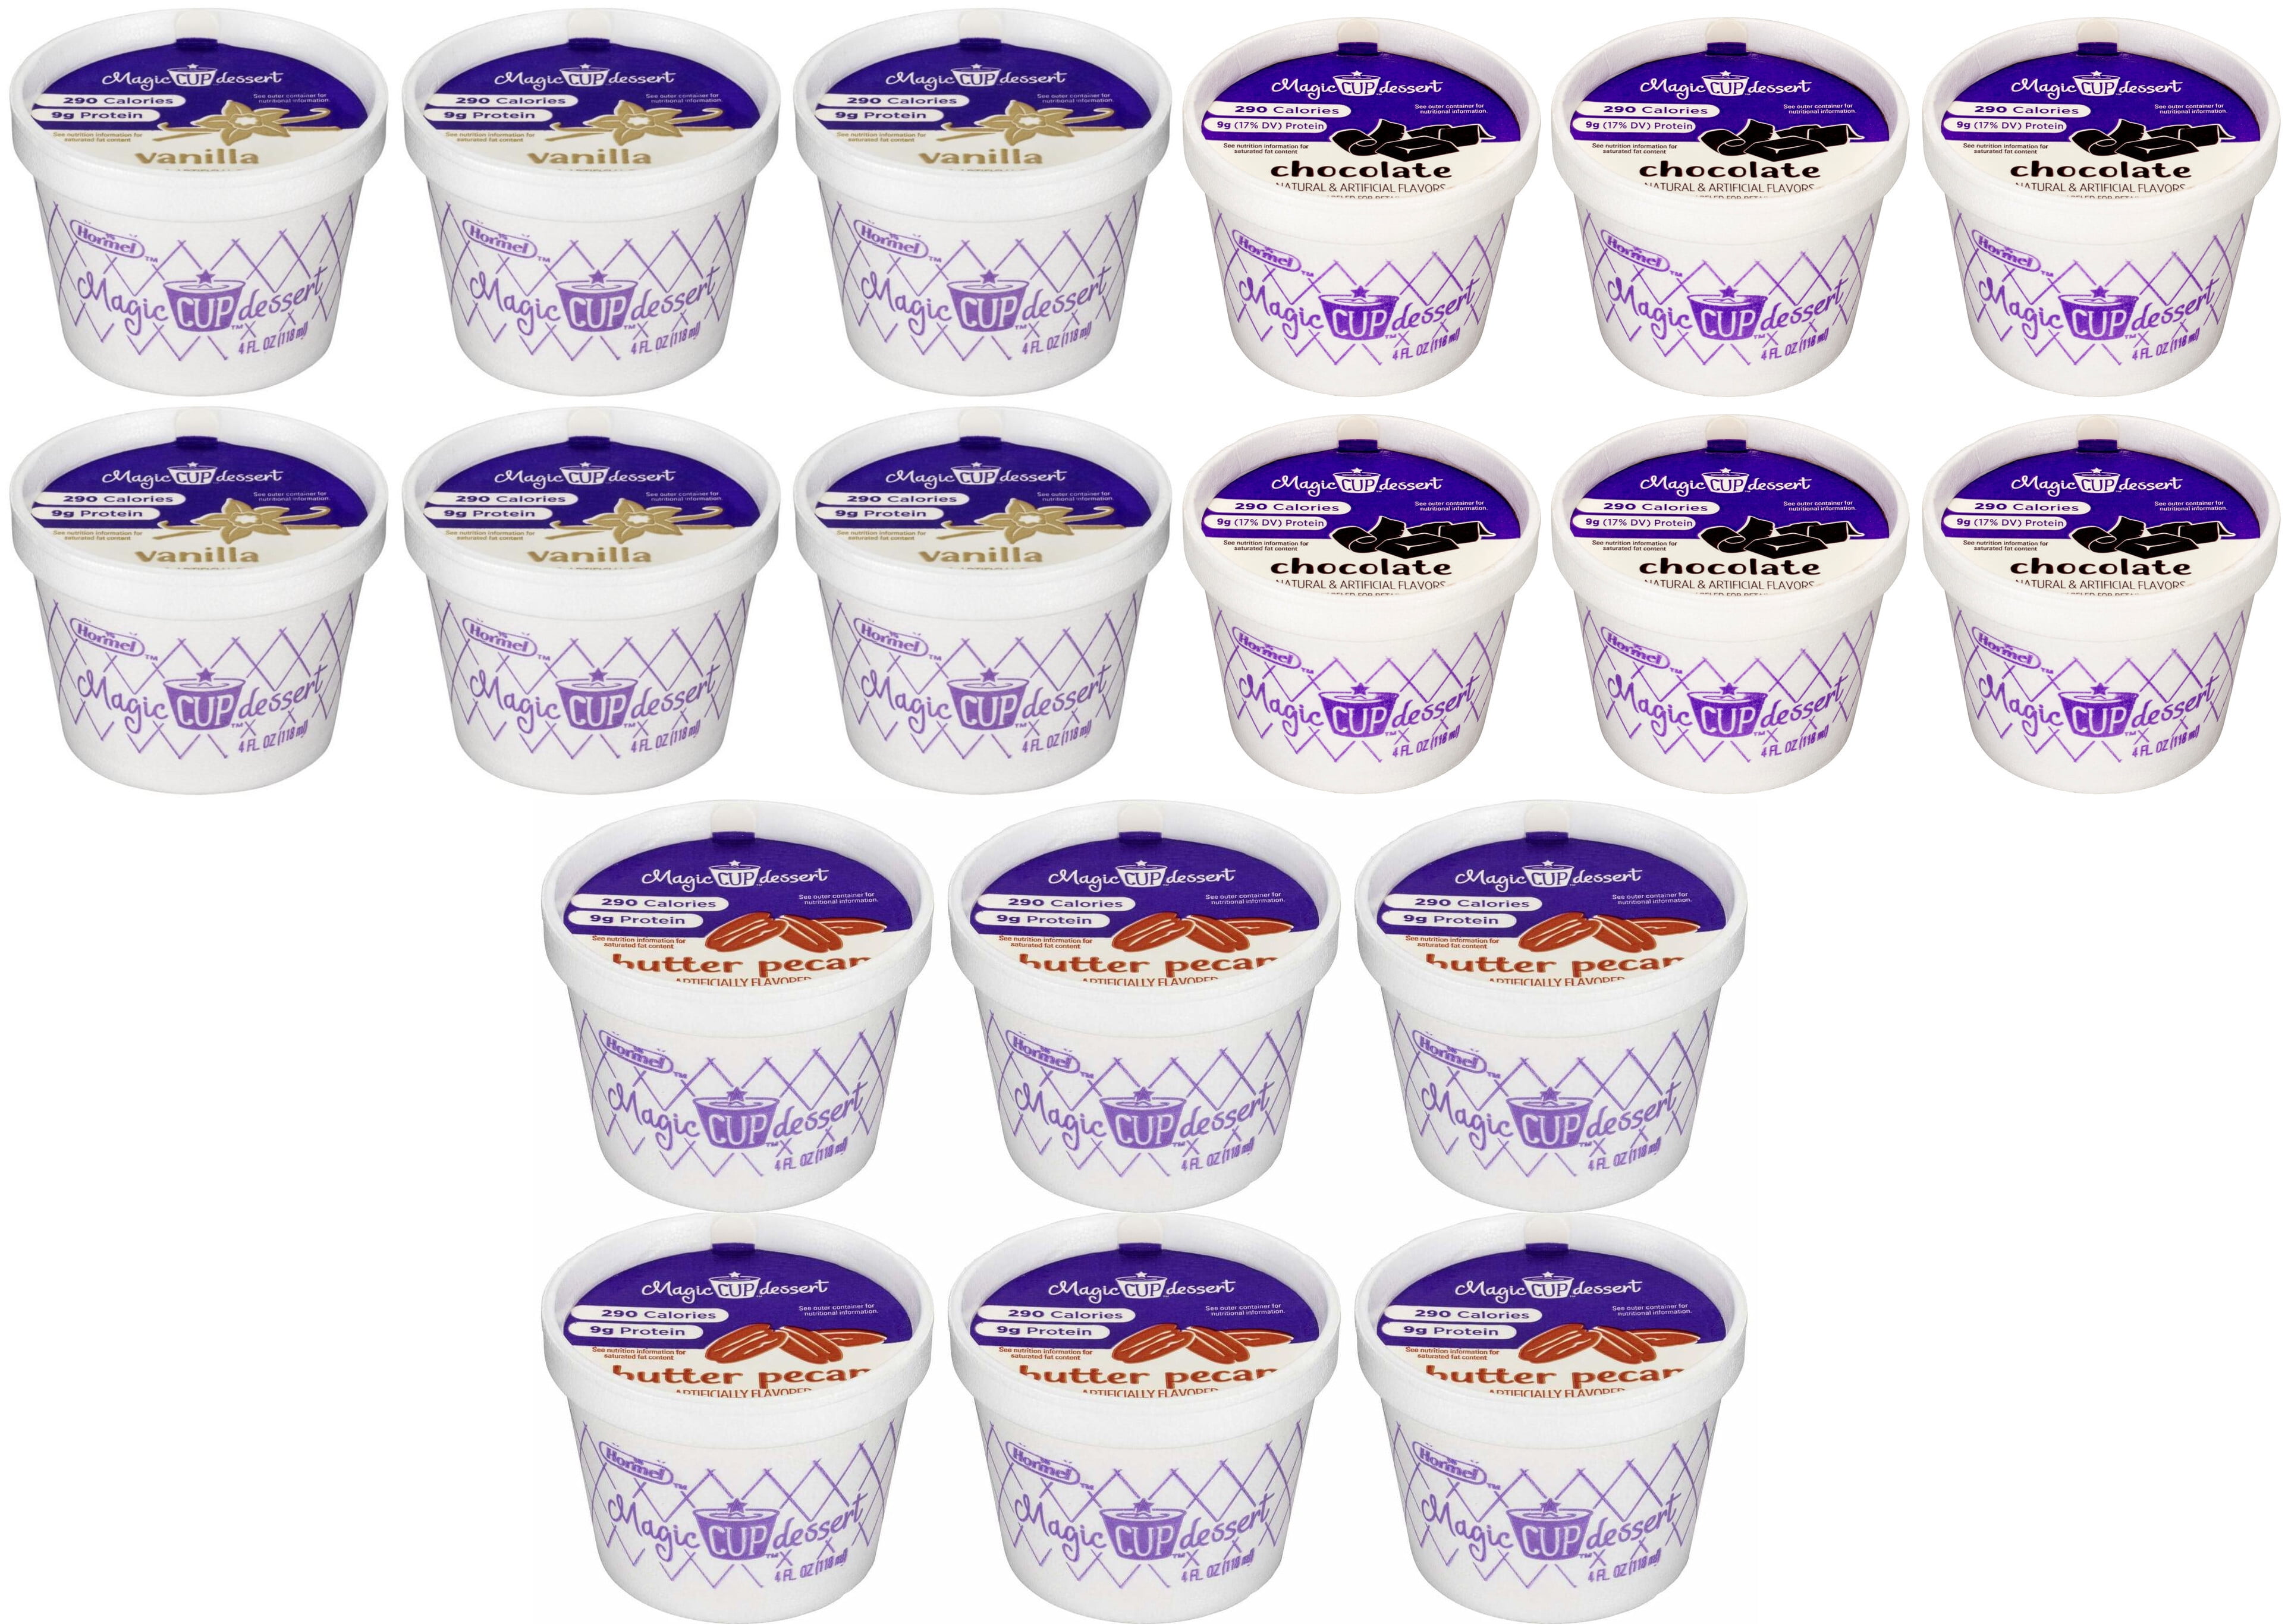 Magic Cup Classic Variety Pack Frozen Dessert, 4 oz. Cup 18-Pack